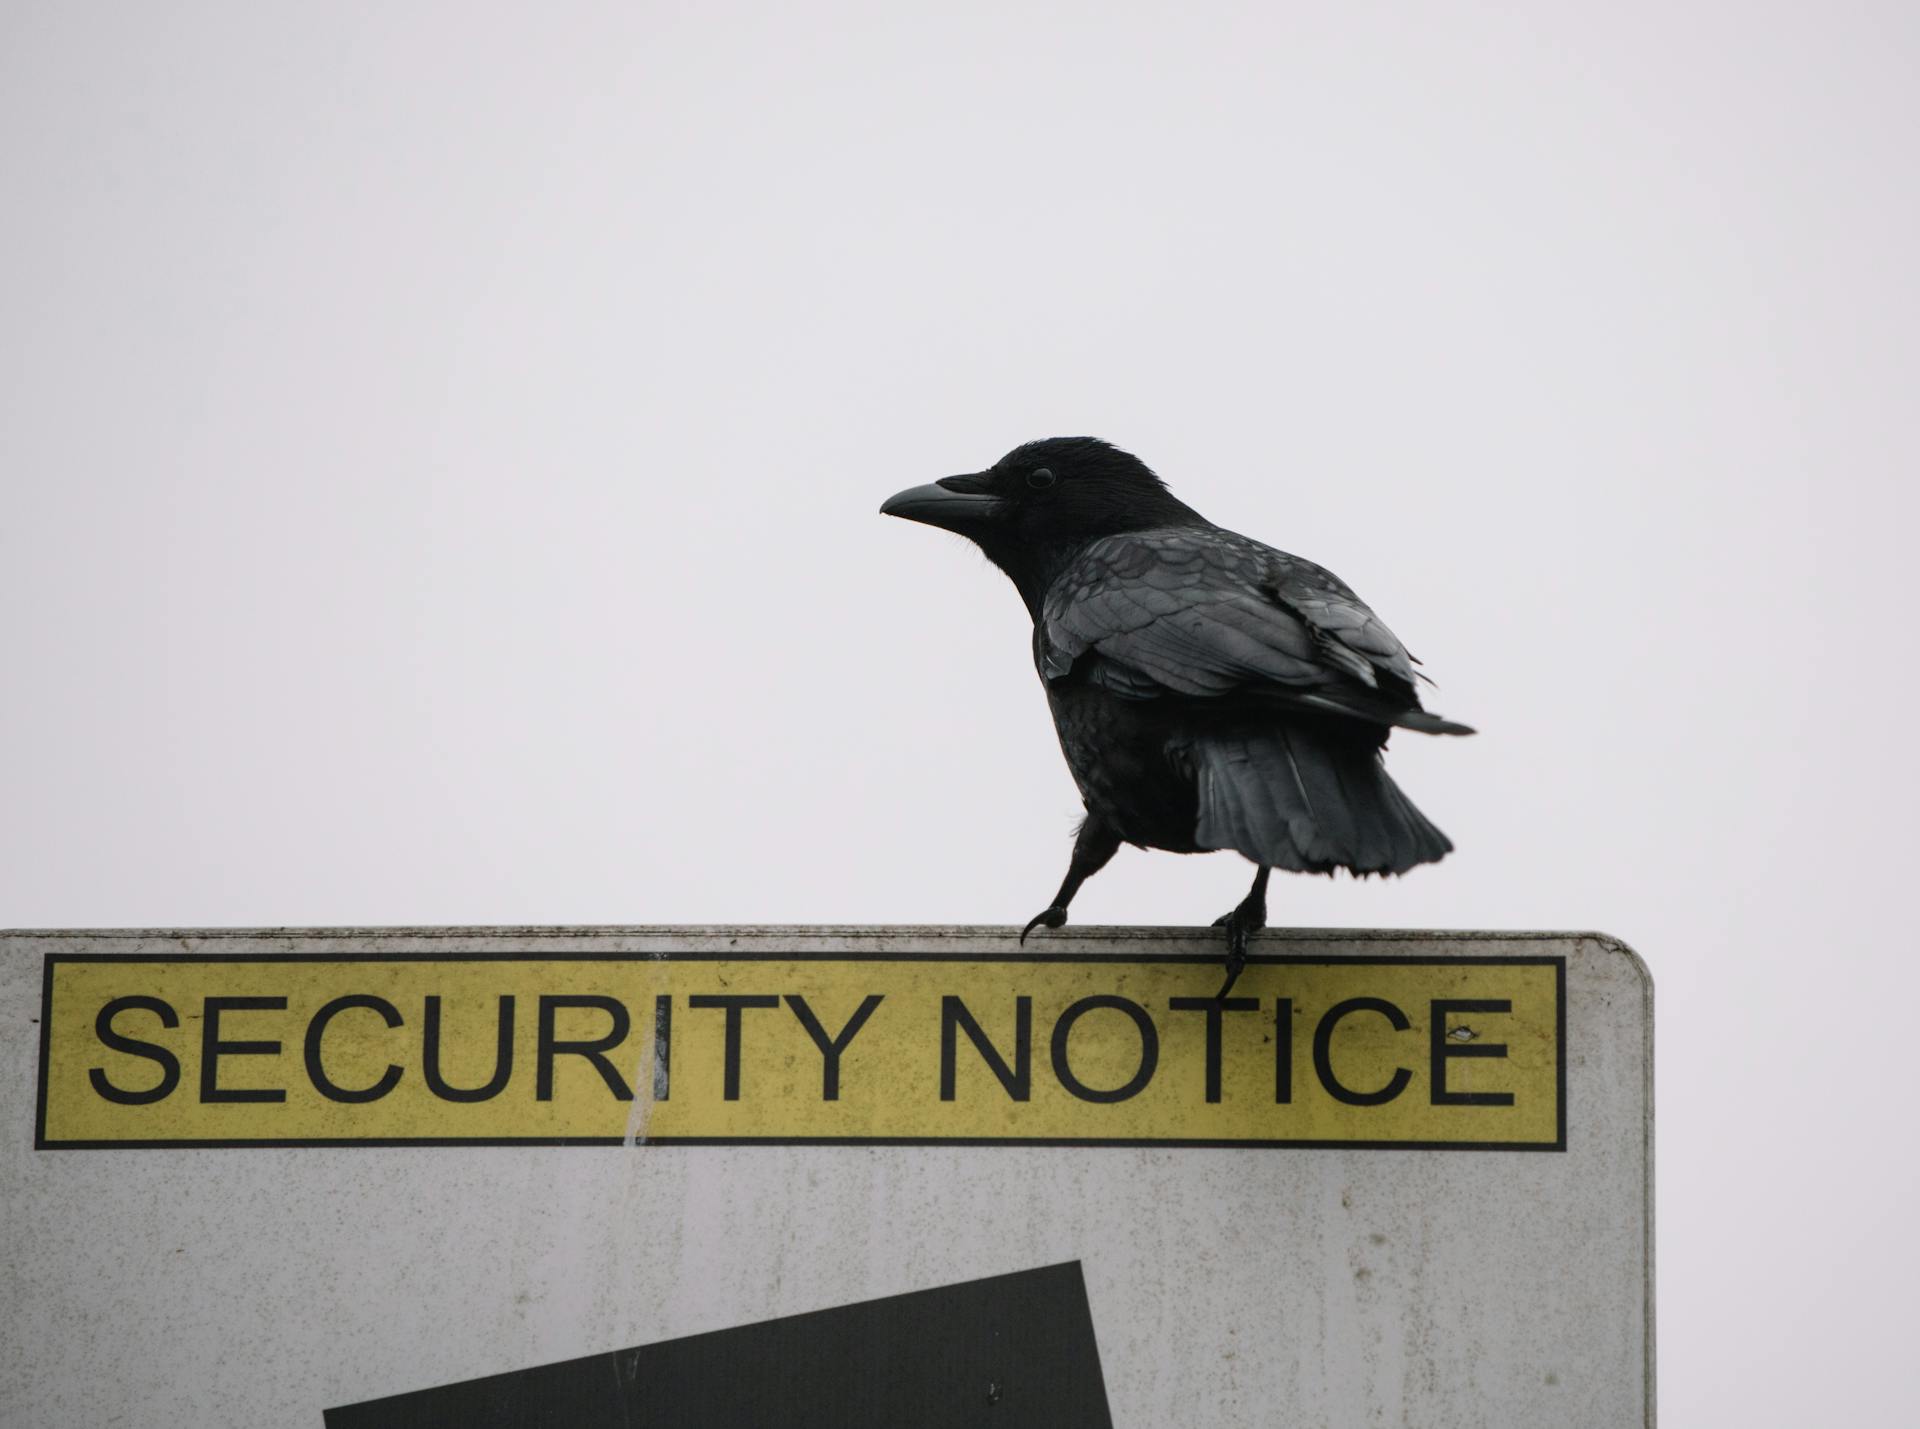 Low angle of wild black crow sitting on road security notice sign on gray background